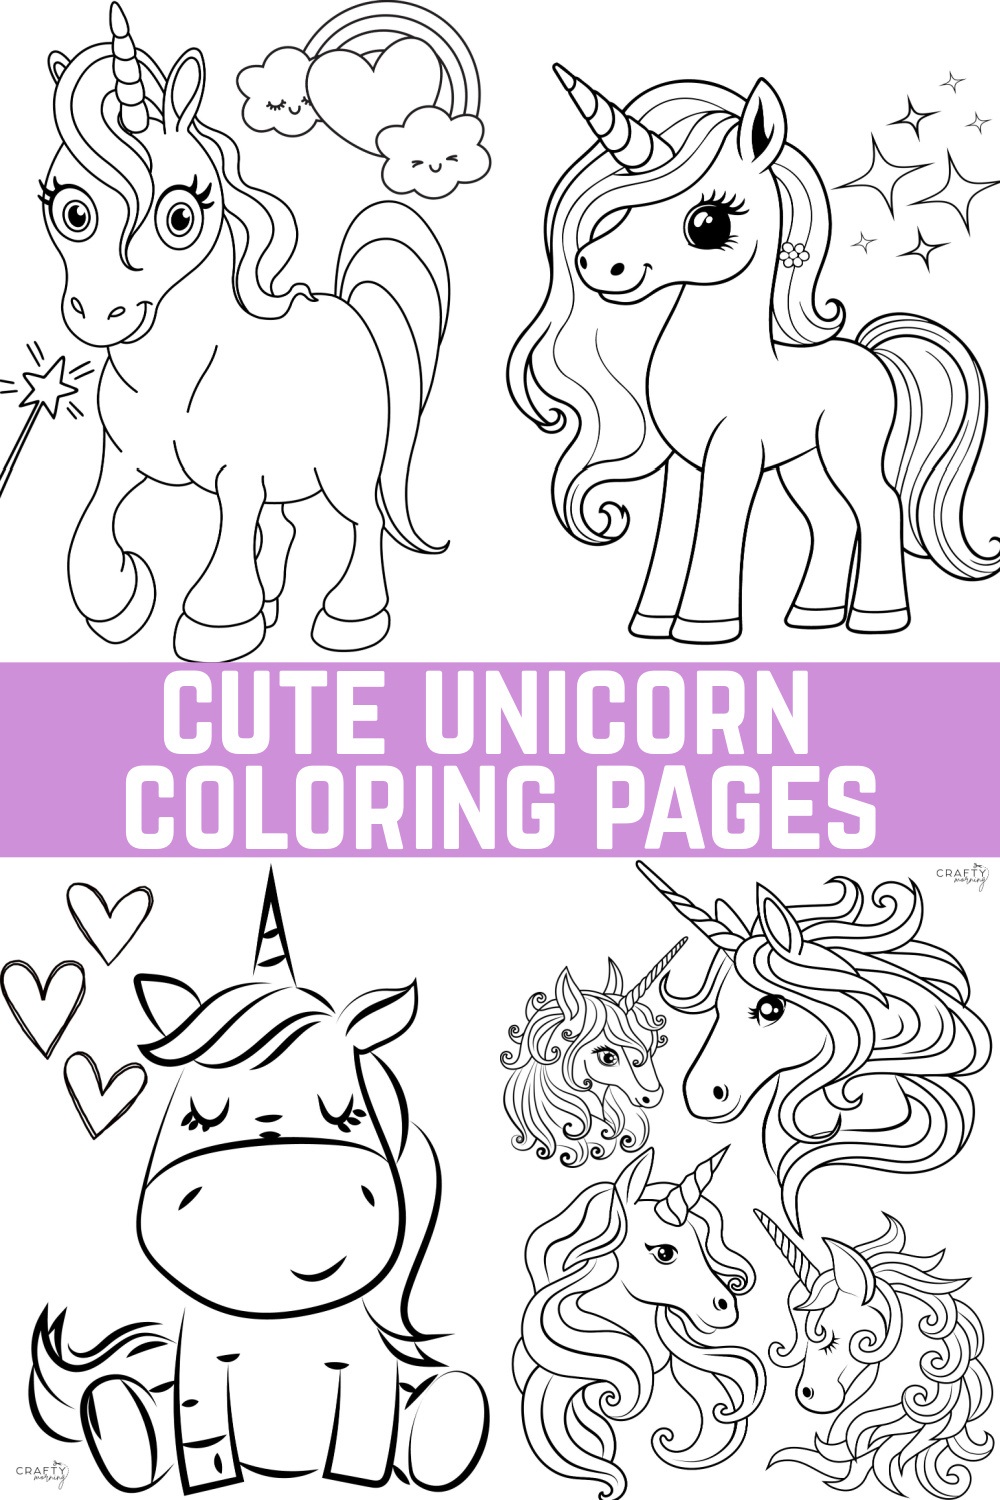 Coloring Pages of a Unicorn - Crafty Morning